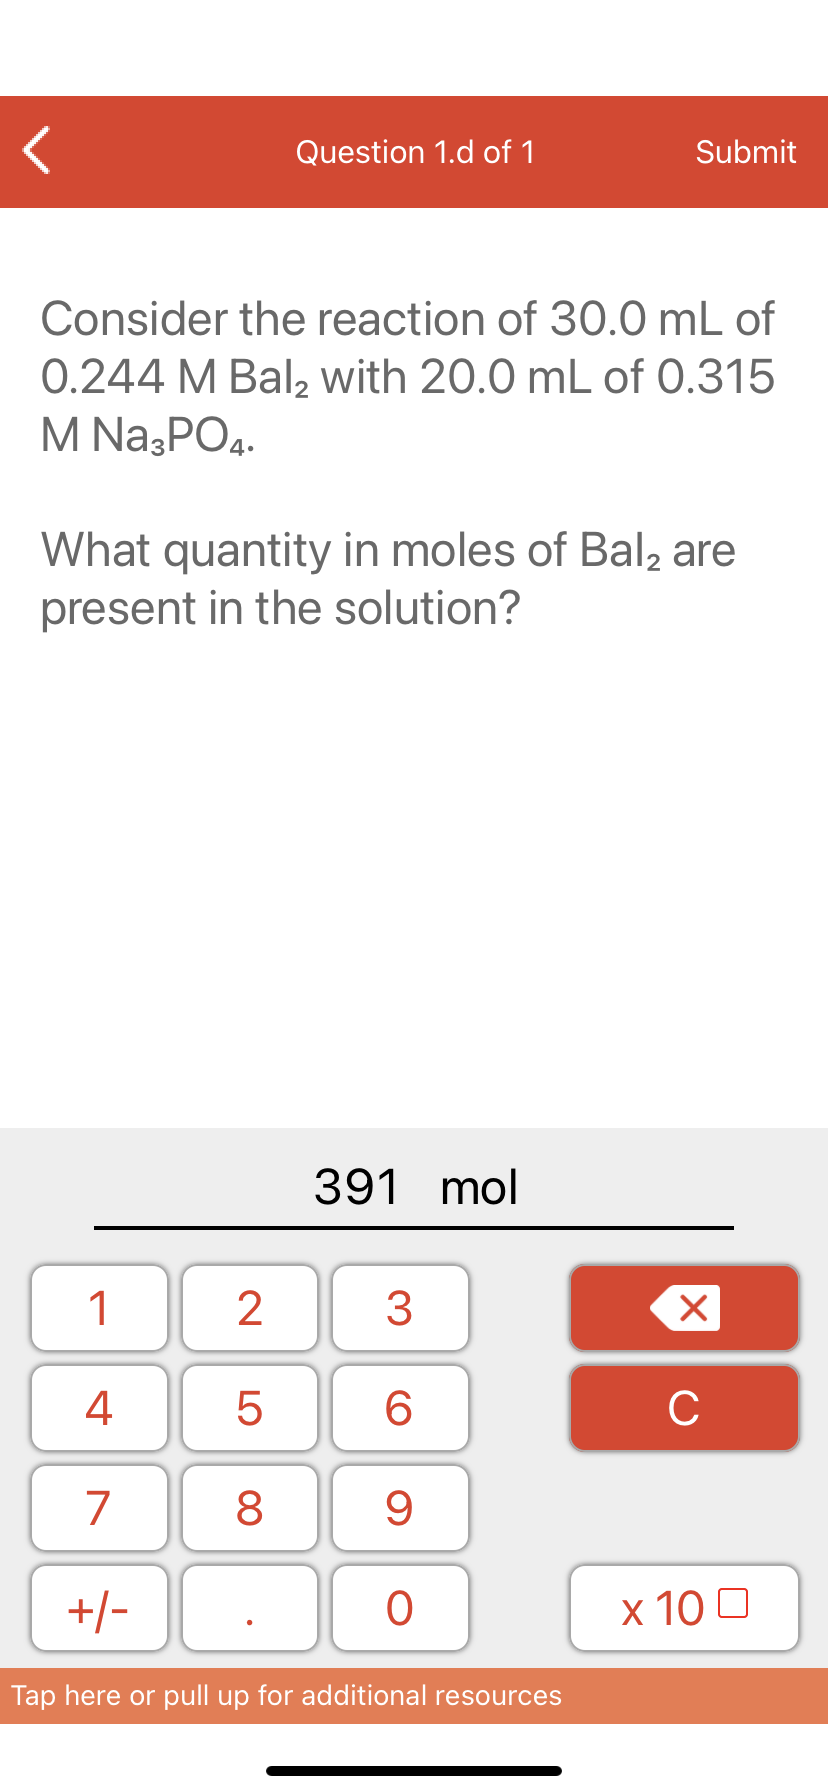 Question 1.d of 1
Submit
Consider the reaction of 30.0 mL of
0.244 M Bal, with 20.0 mL of 0.315
M Na3PO4.
What quantity in moles of Bal, are
present in the solution?
391 mol
1
4
6.
C
7
9
+/-
x 10 0
Tap here or pull up for additional resources
LO
00
